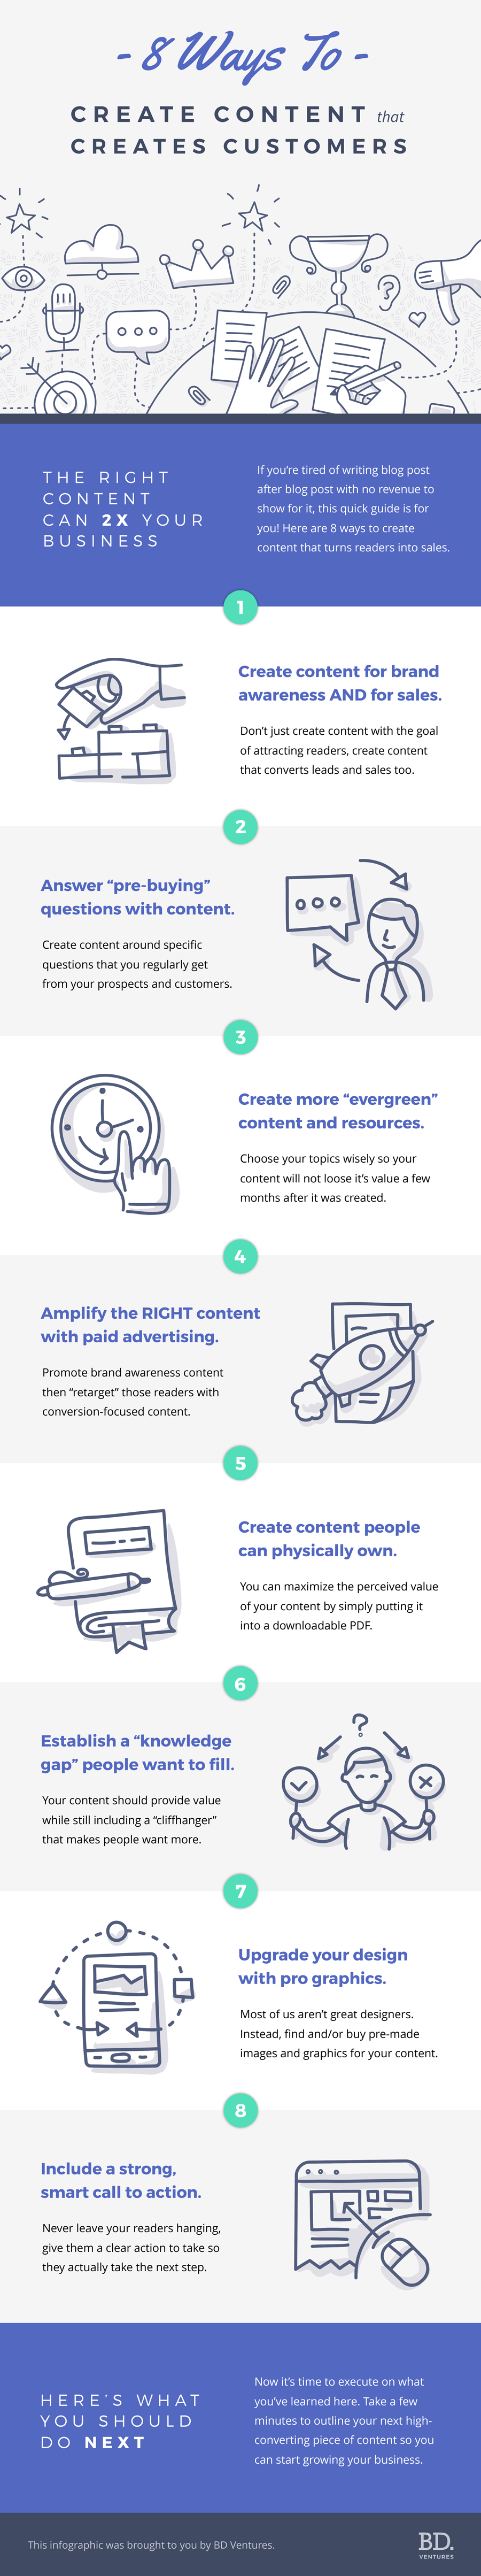 8 Ways To Create Content That Creates Customers - #Infographic